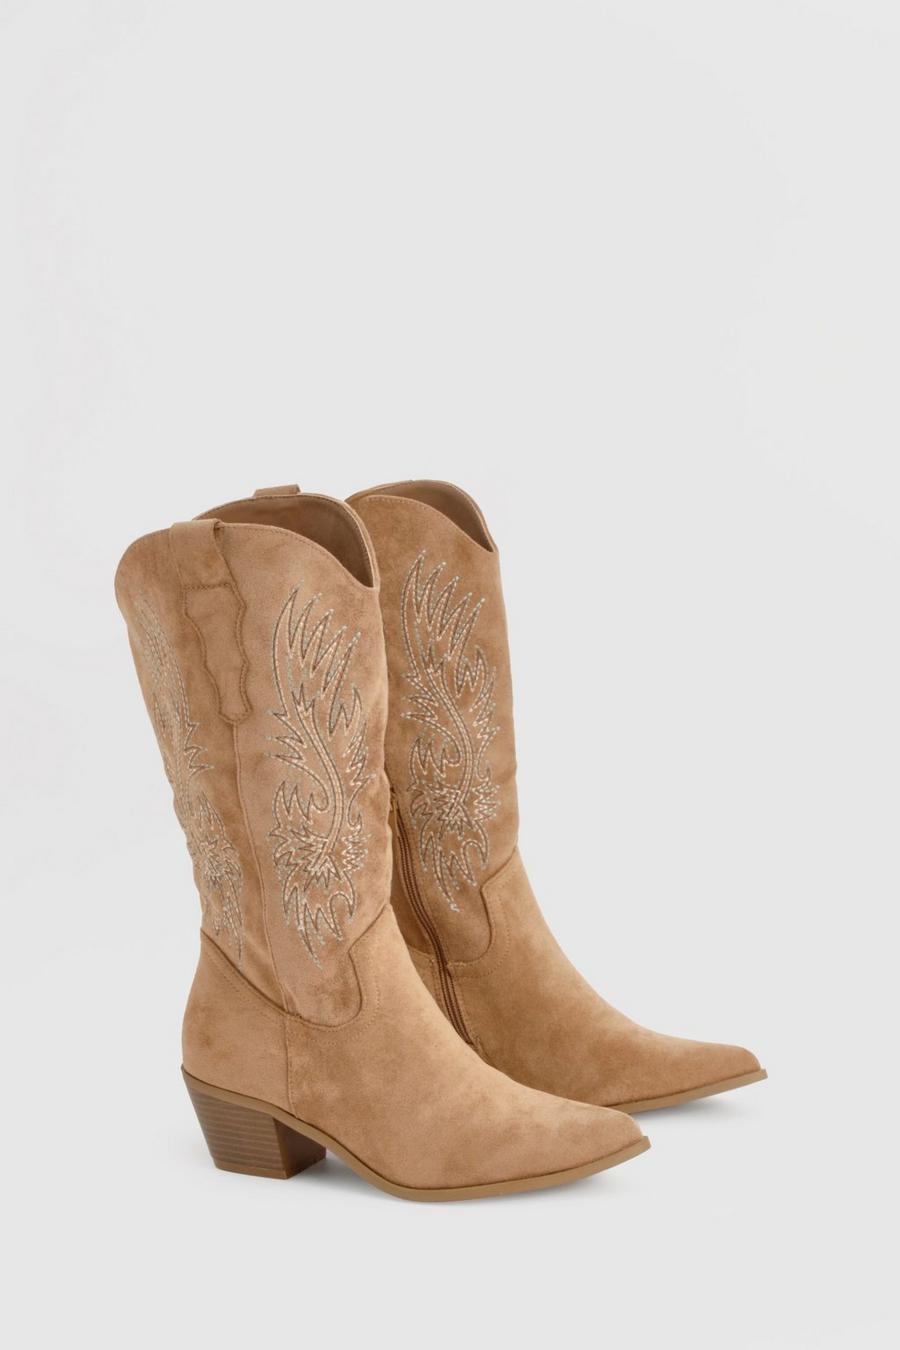 Camel Embroidered Knee High Western Boots    